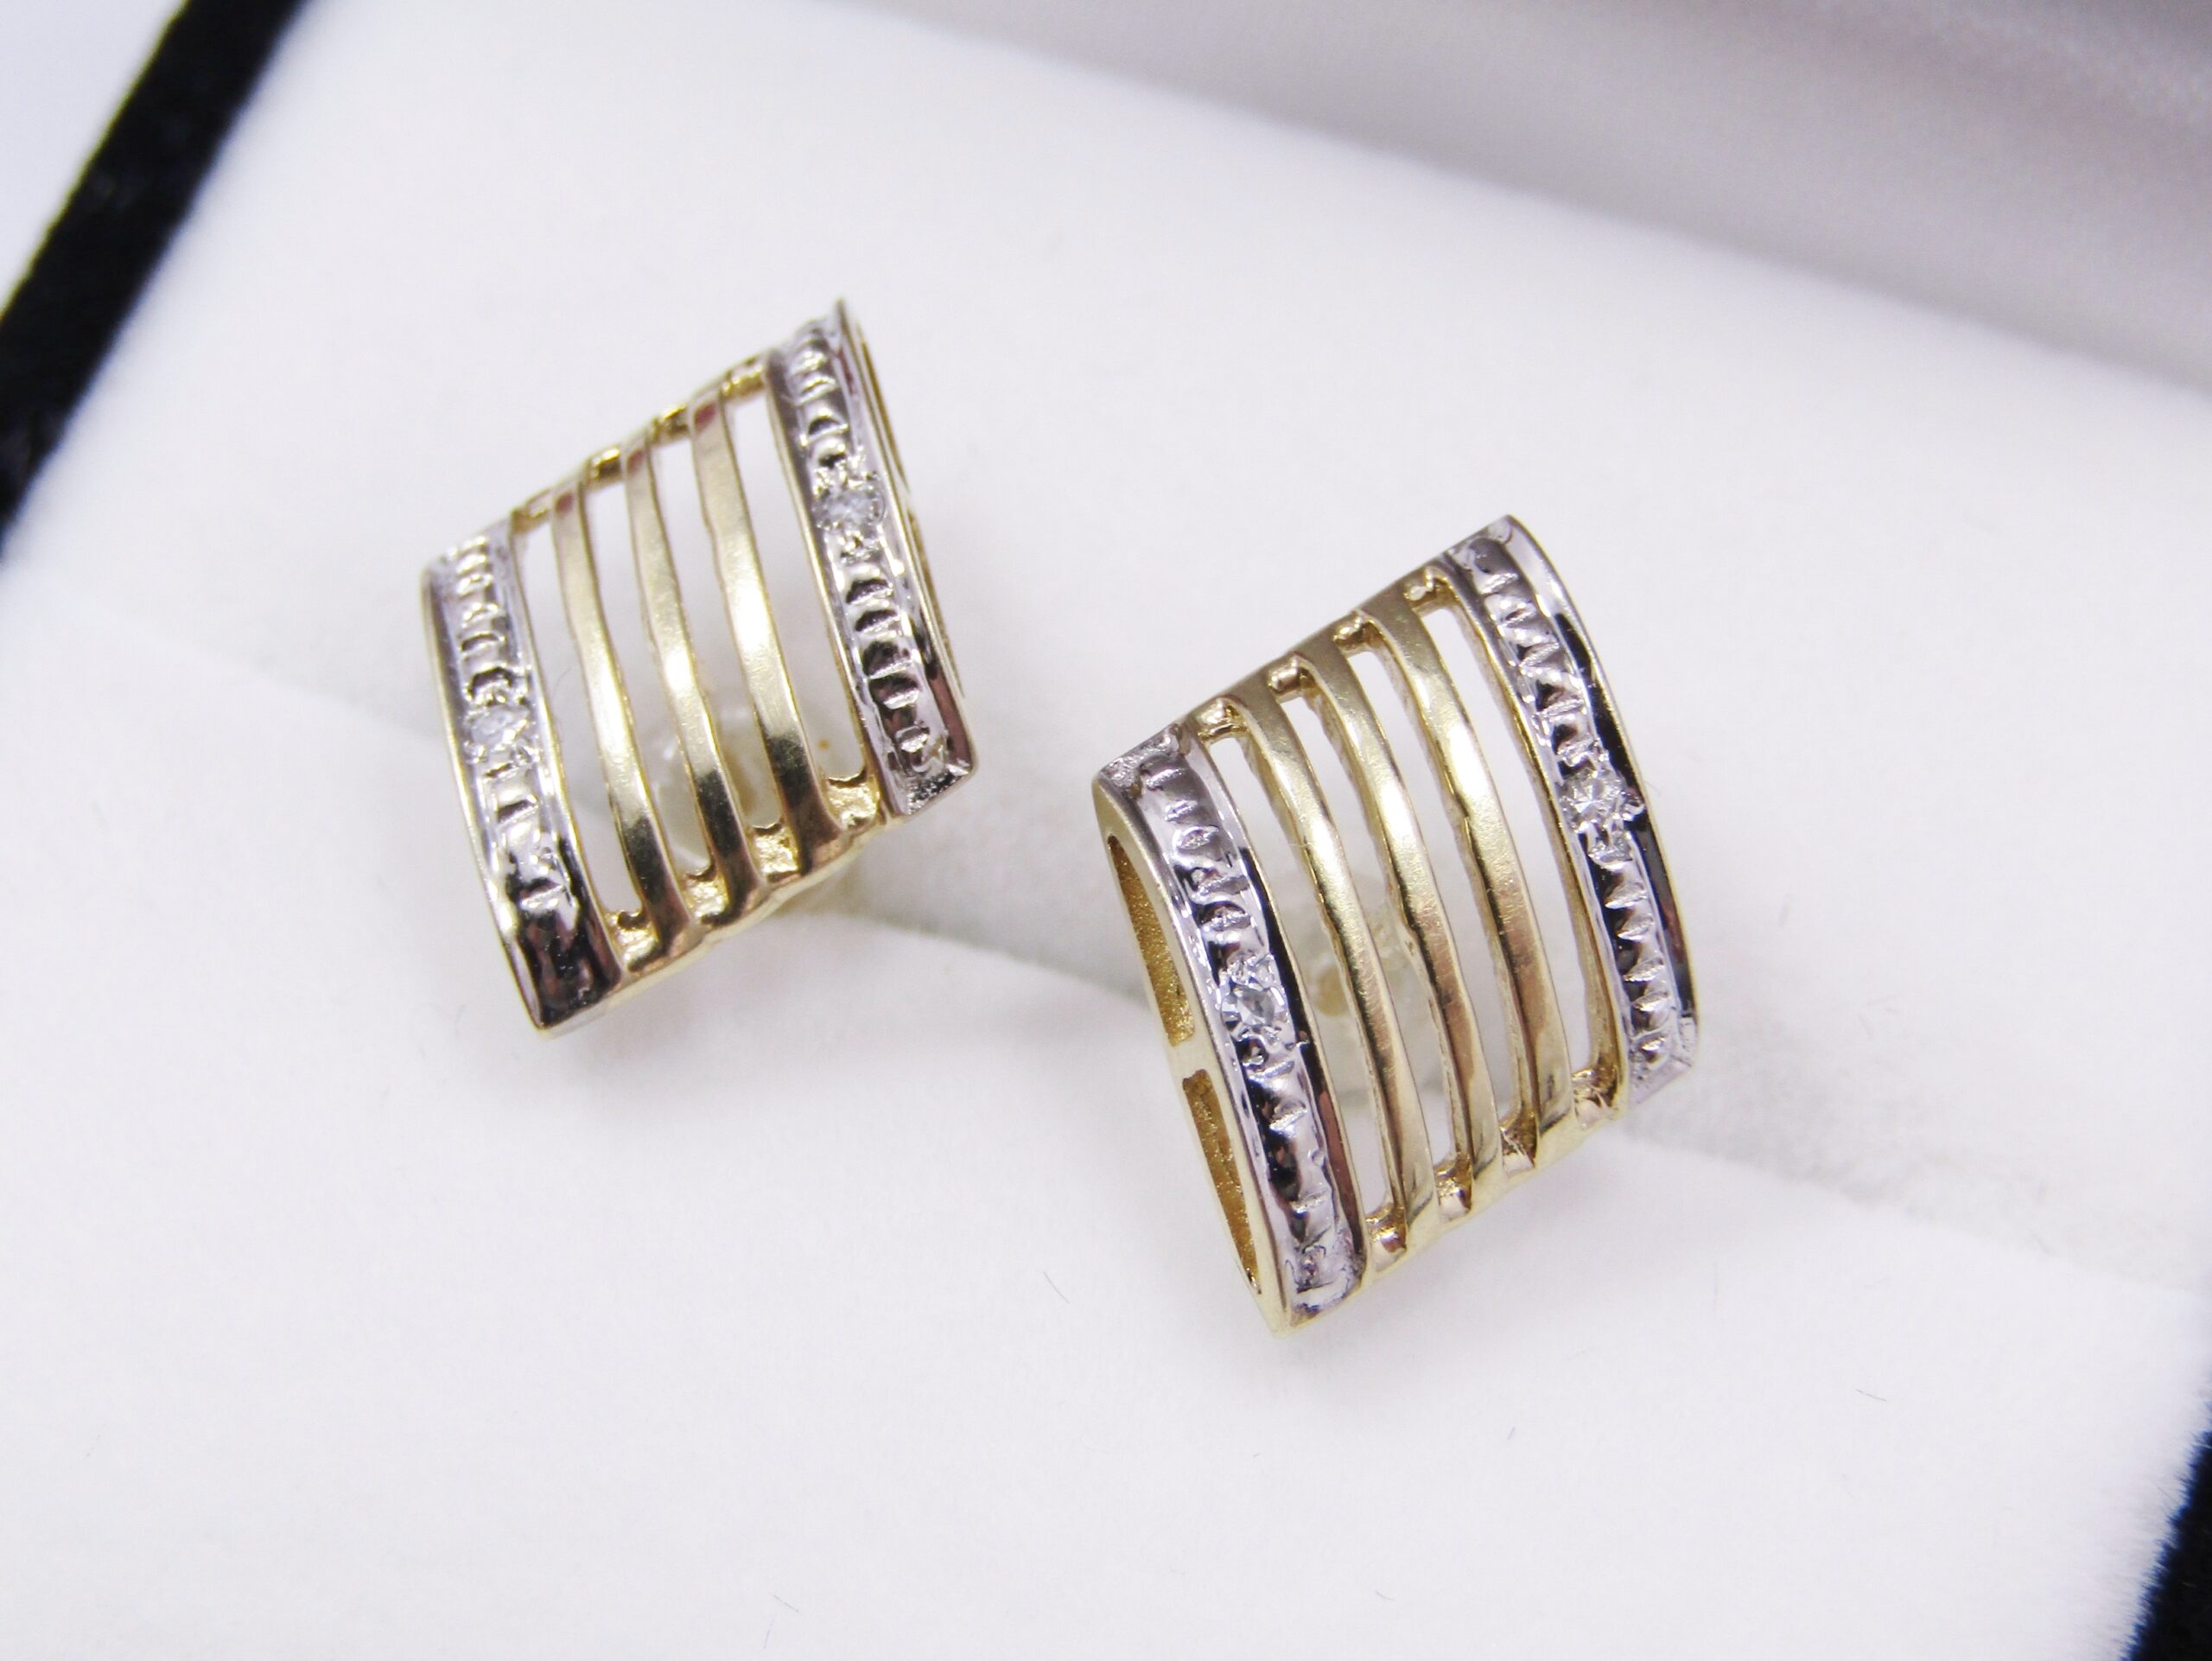 Beautiful Pair of Patterned Designed Stud Earrings in 9ct Gold